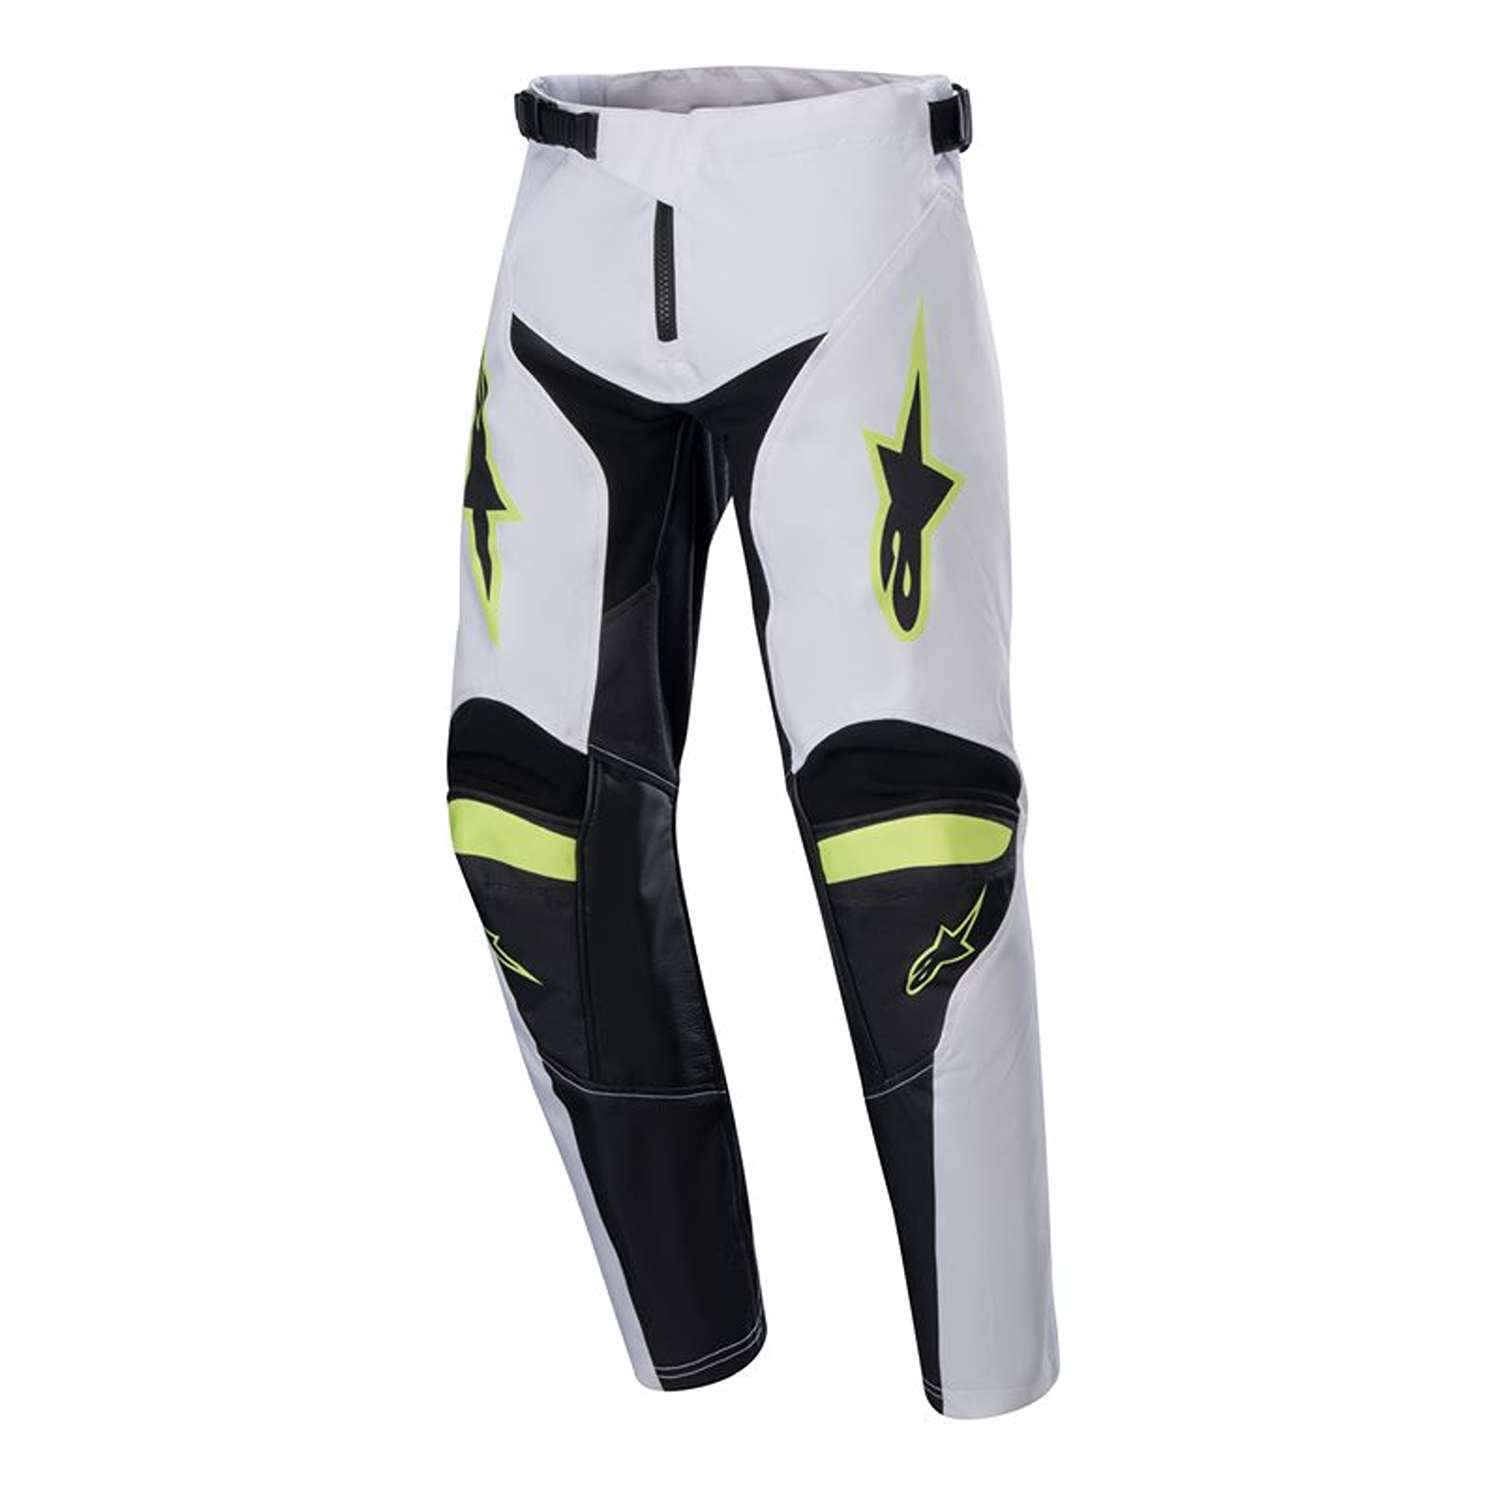 Image of Alpinestars Youth Racer Lucent Pants White Neon Red Yellow Fluo Größe 24